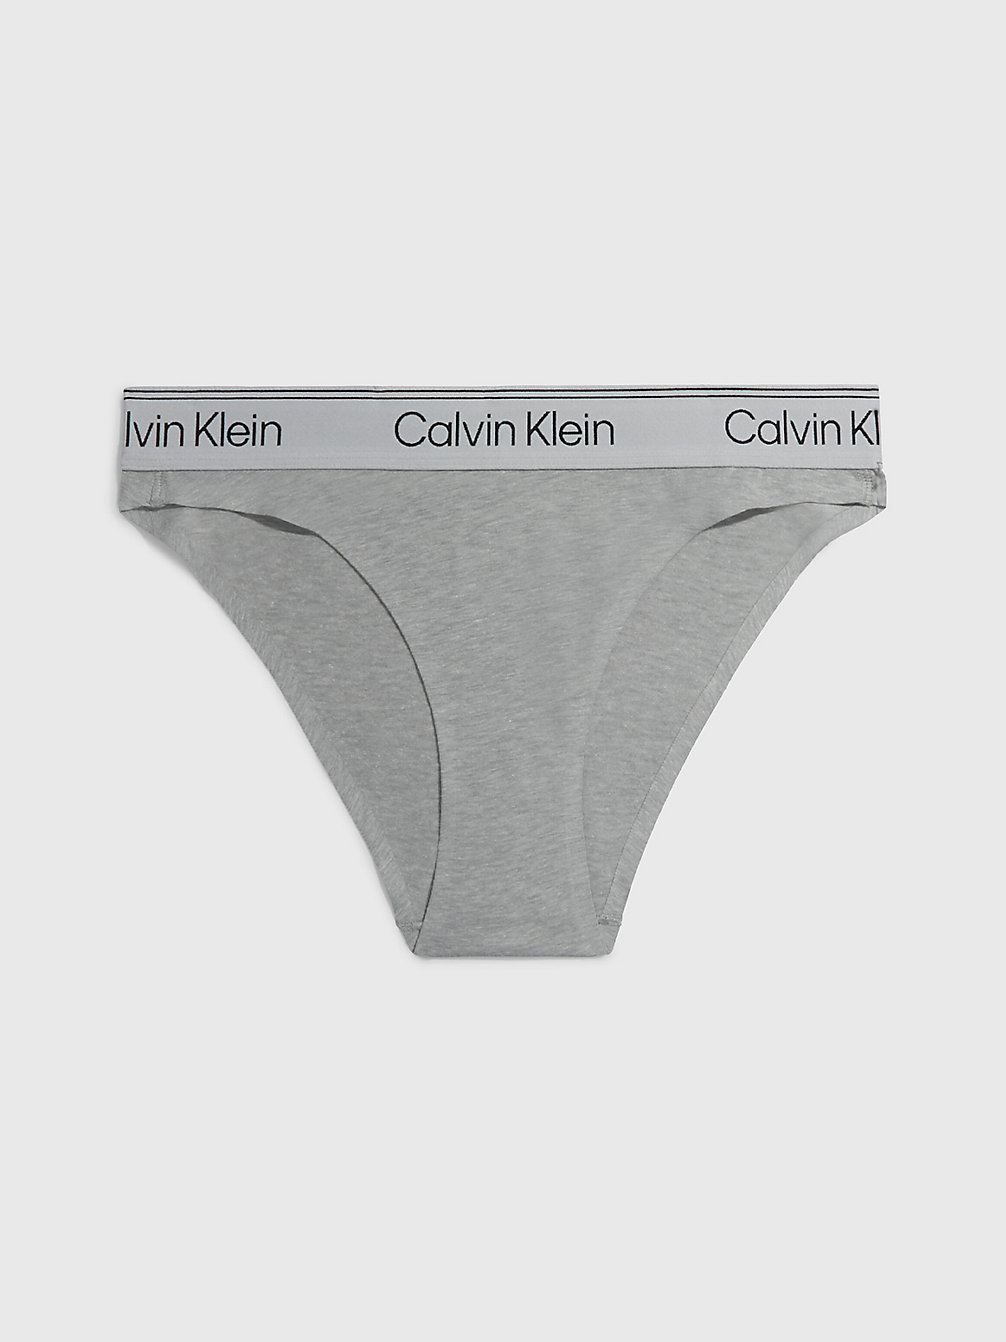 Tanga - Athletic Cotton > ATH GREY HEATHER > undefined mujer > Calvin Klein